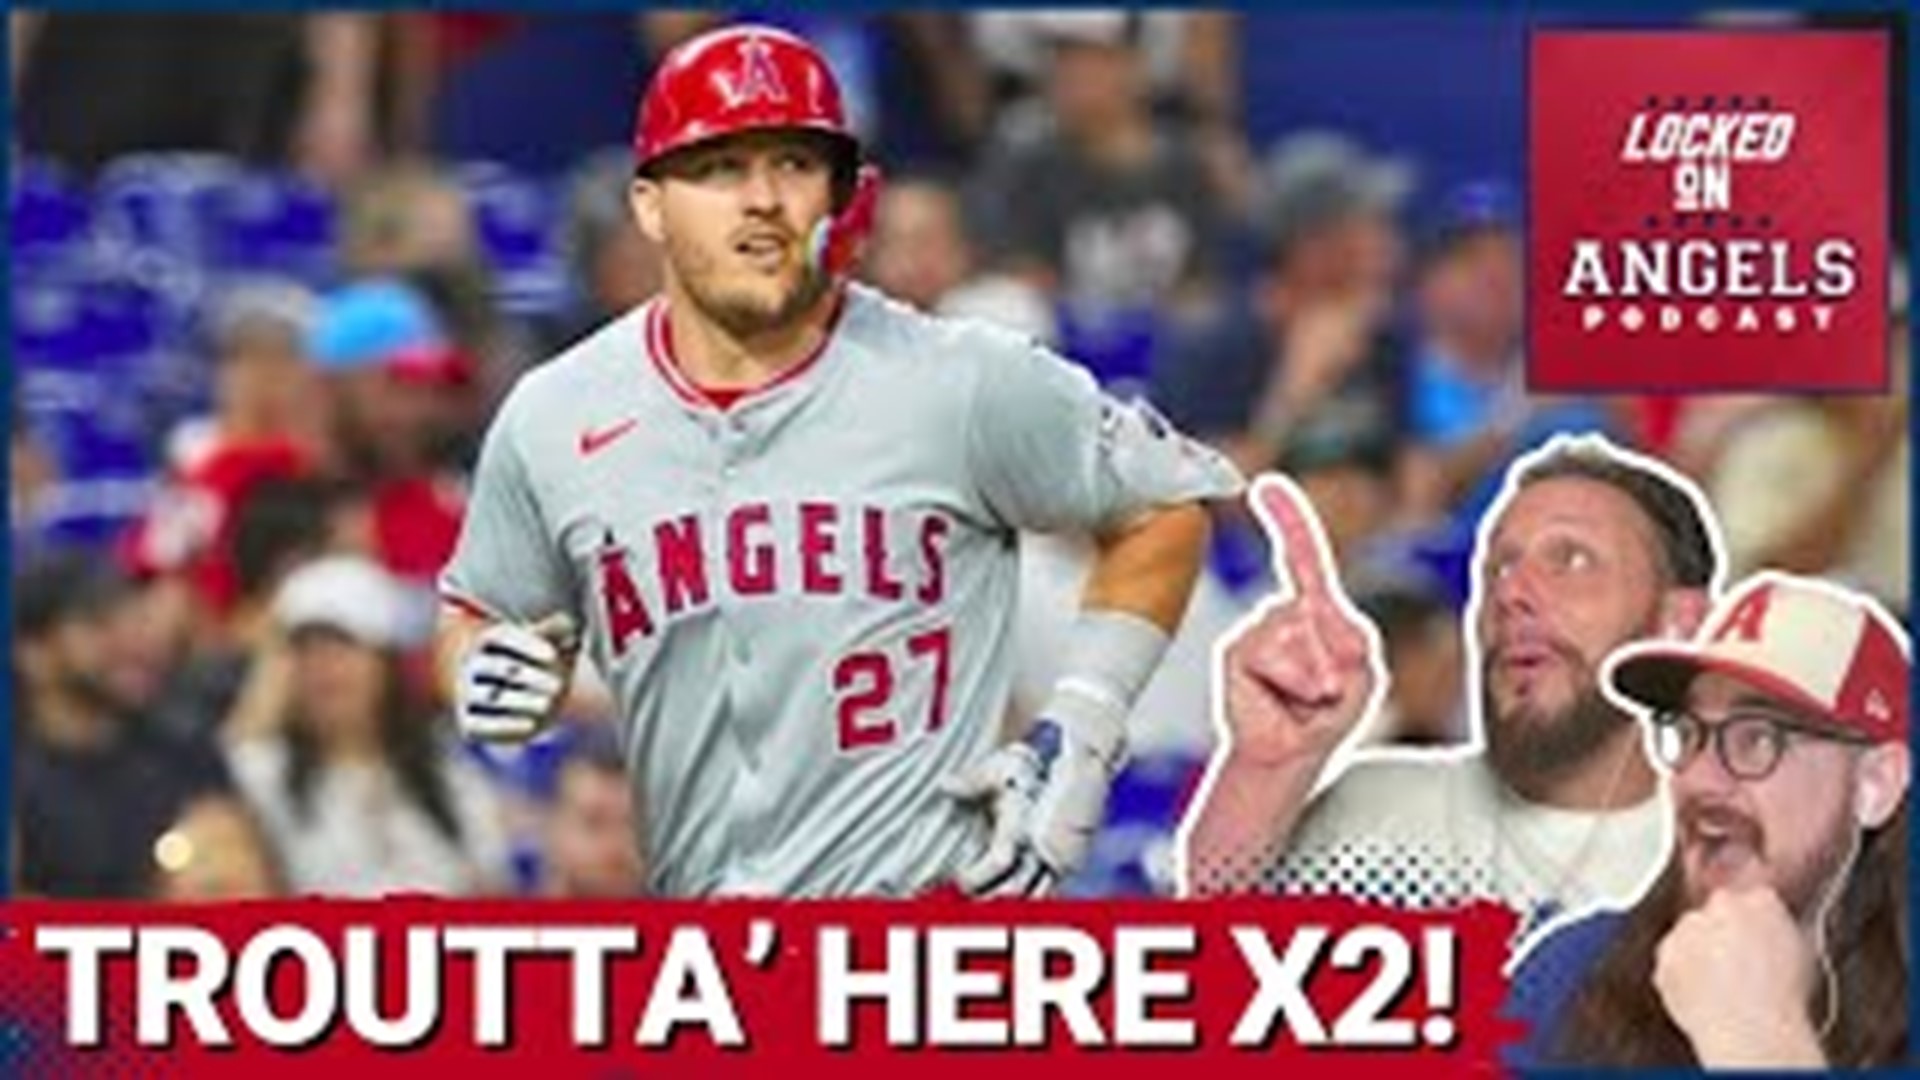 The Los Angeles Angels win their second game in a row and climb to 2-2 on the season, thanks to Mike Trout hammering two home runs, Nolan Schanuel hitting one too.